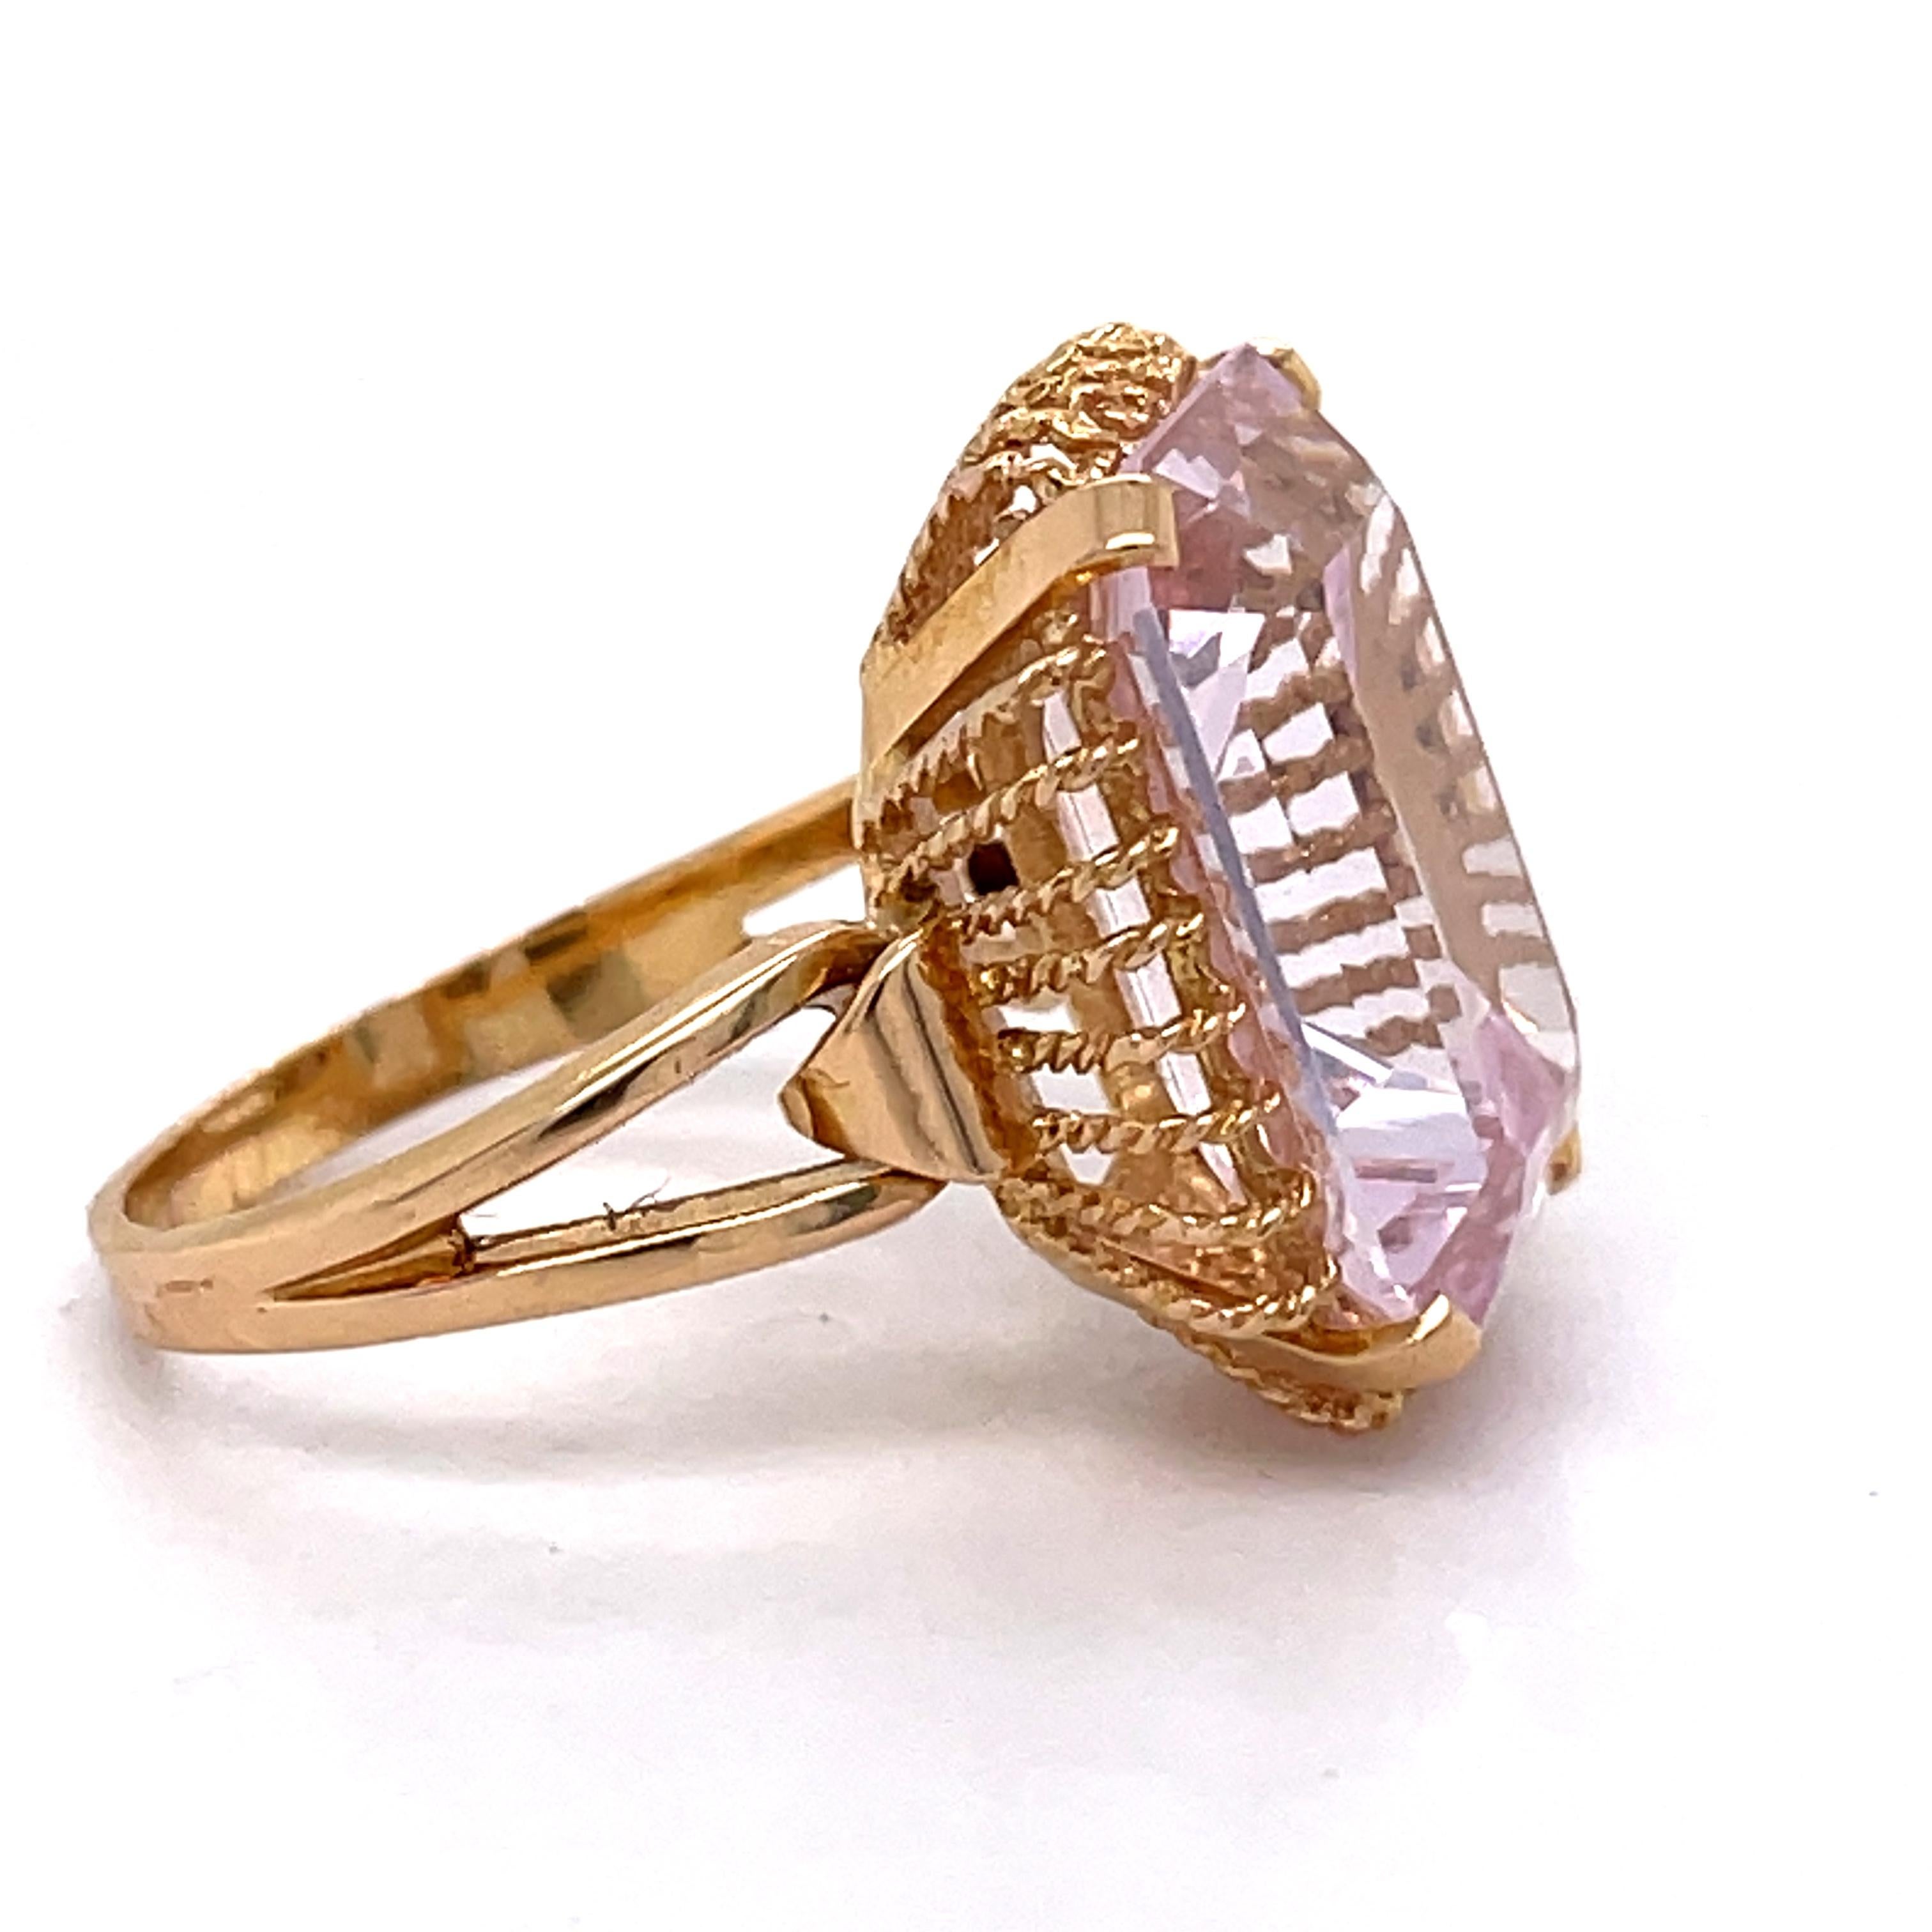 GWLAB Certified, 16.23ct Pink Spinel Emerald Cut, 14k Rose Gold, Cocktail Ring In Excellent Condition For Sale In Ramat Gan, IL